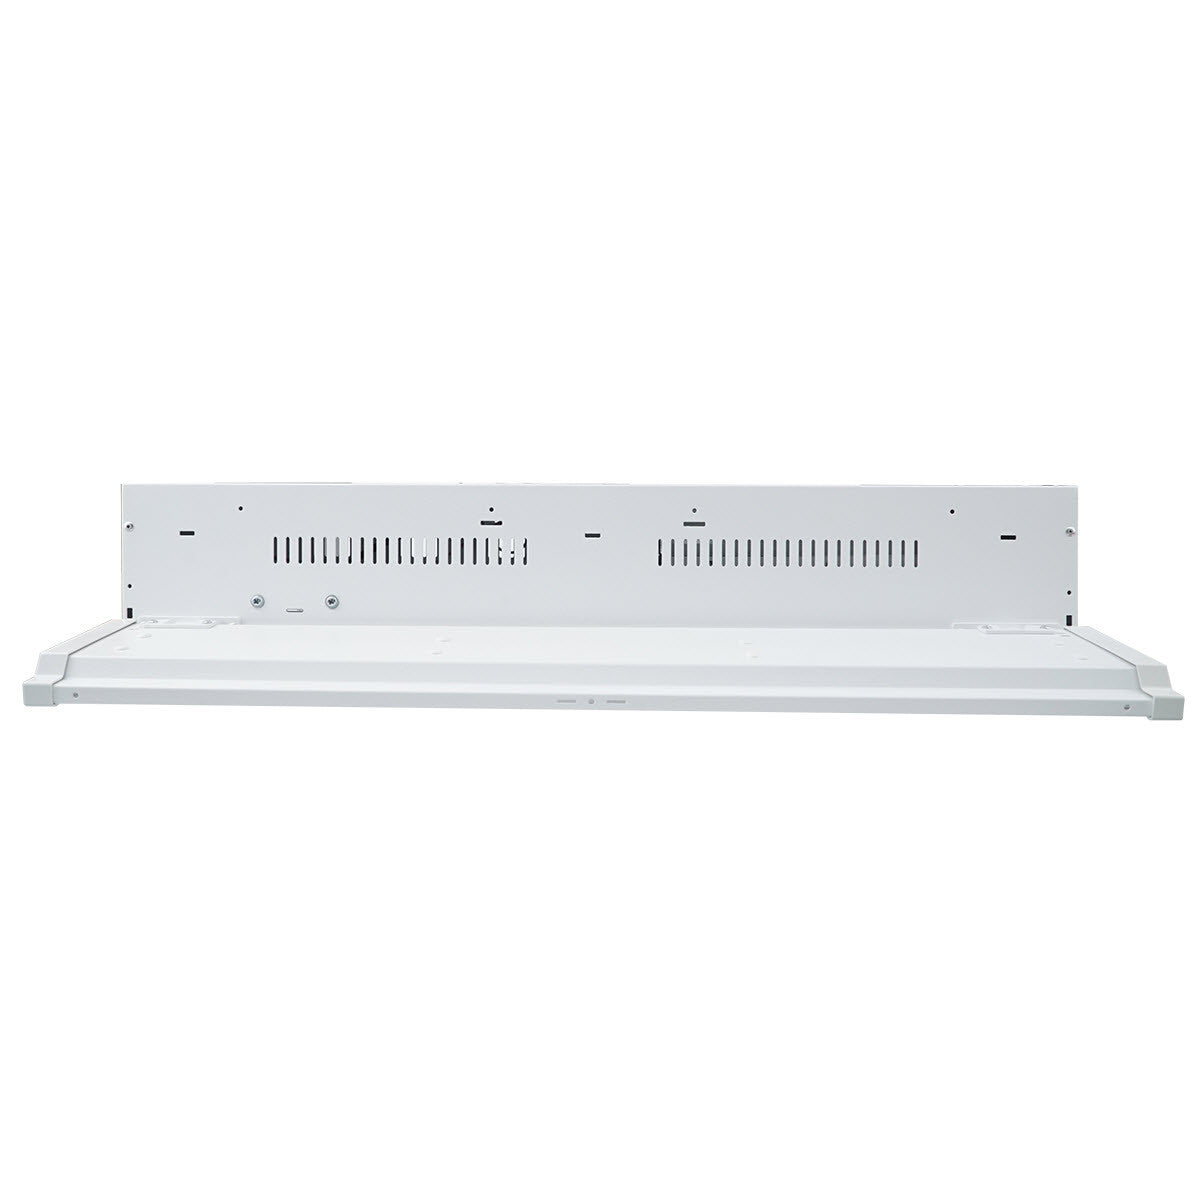 Foldable 2 Foot Linear High Bay, 23,625 Lumens, 145W/160W/175W Selectable, 5000K, 0-10V Dimmable, 120-277V, White Finish